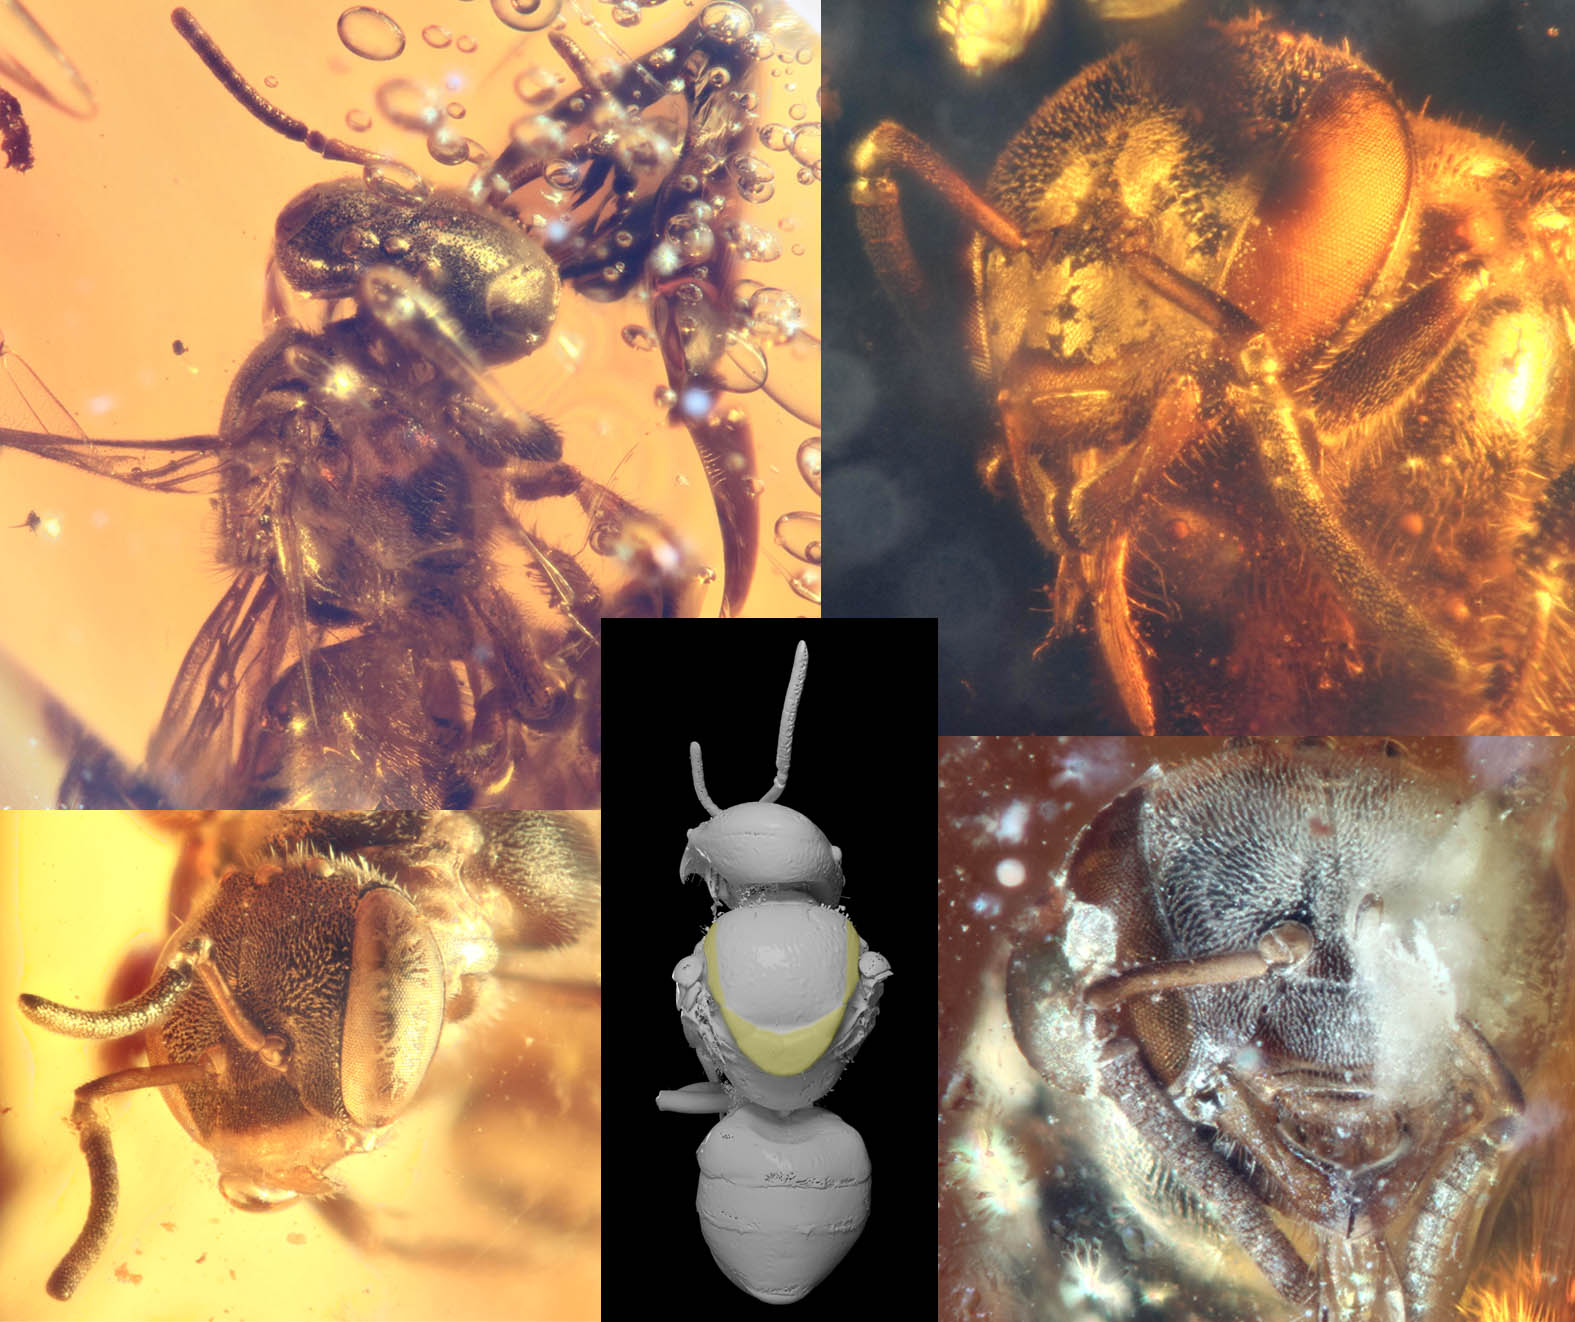 					View No. 105 (2021): Stingless bees in Miocene amber of southeastern China (Hymenoptera: Apidae)
				